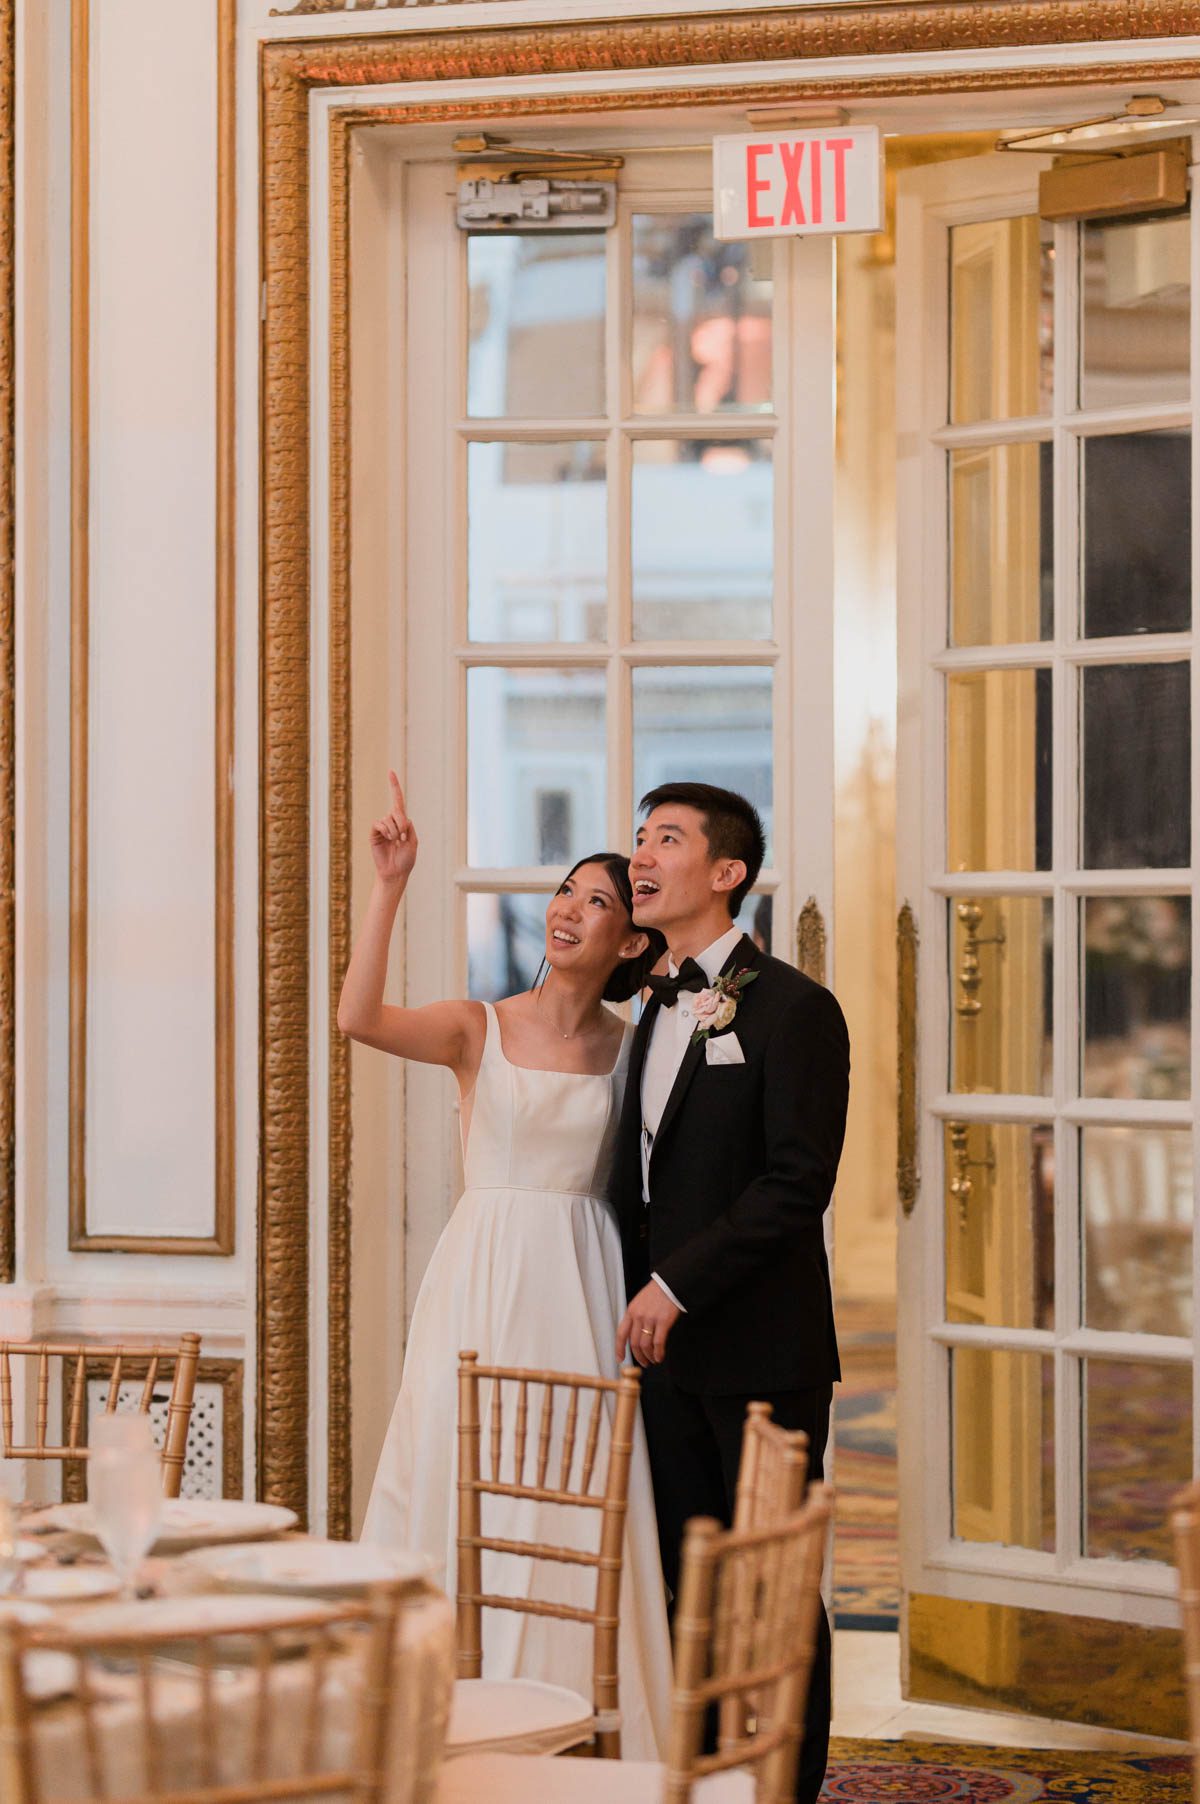 fairmont copley plaza wedding reception reveal to bride and groom